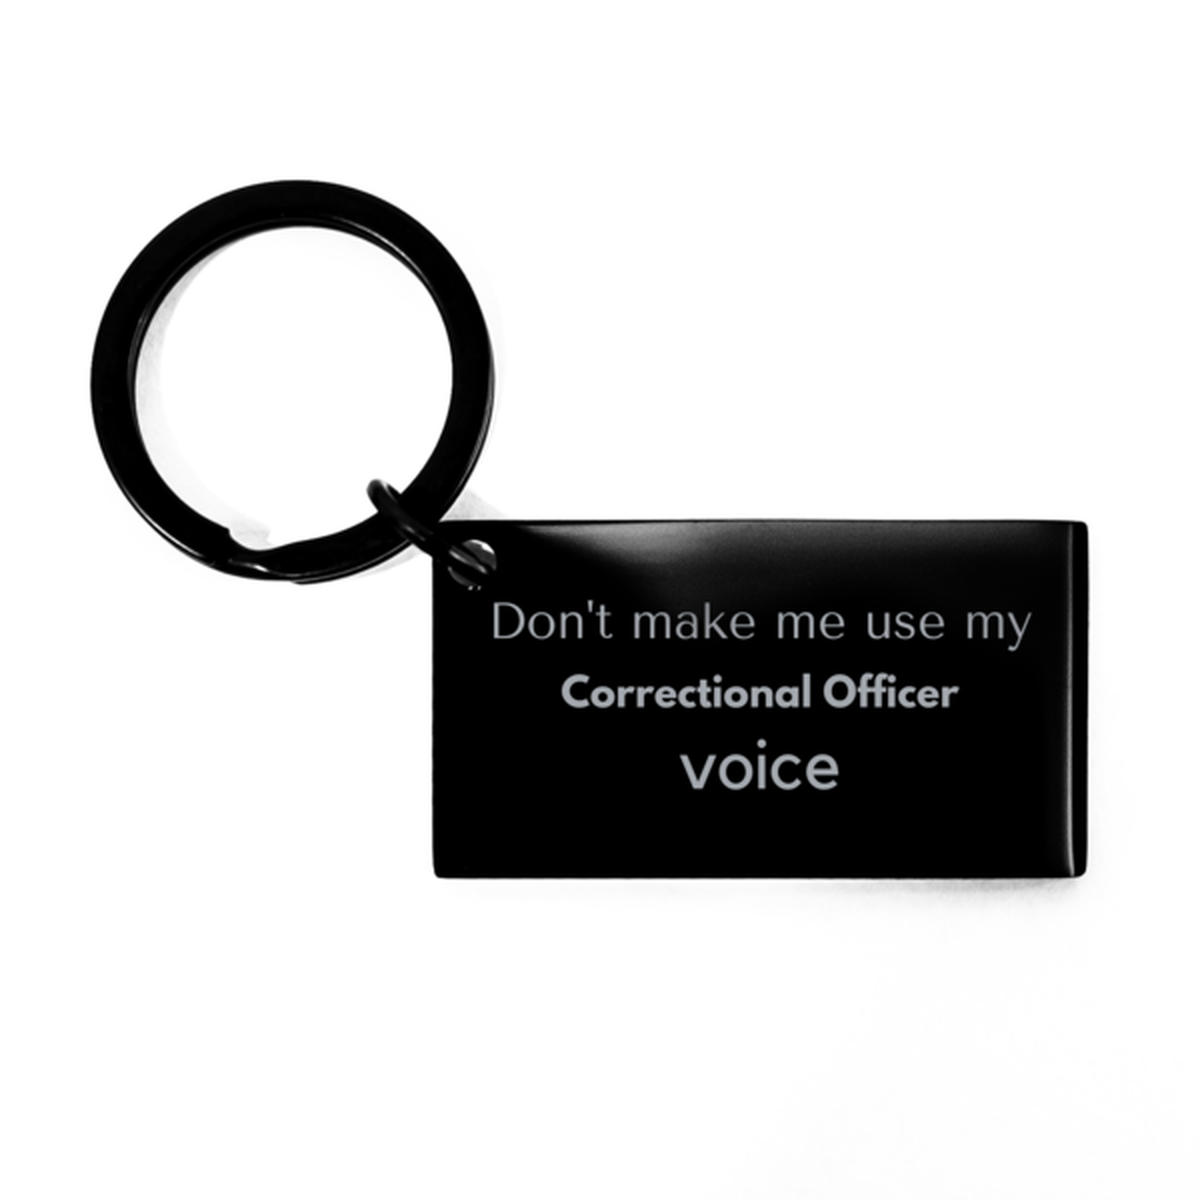 Don't make me use my Correctional Officer voice, Sarcasm Correctional Officer Gifts, Christmas Correctional Officer Keychain Birthday Unique Gifts For Correctional Officer Coworkers, Men, Women, Colleague, Friends